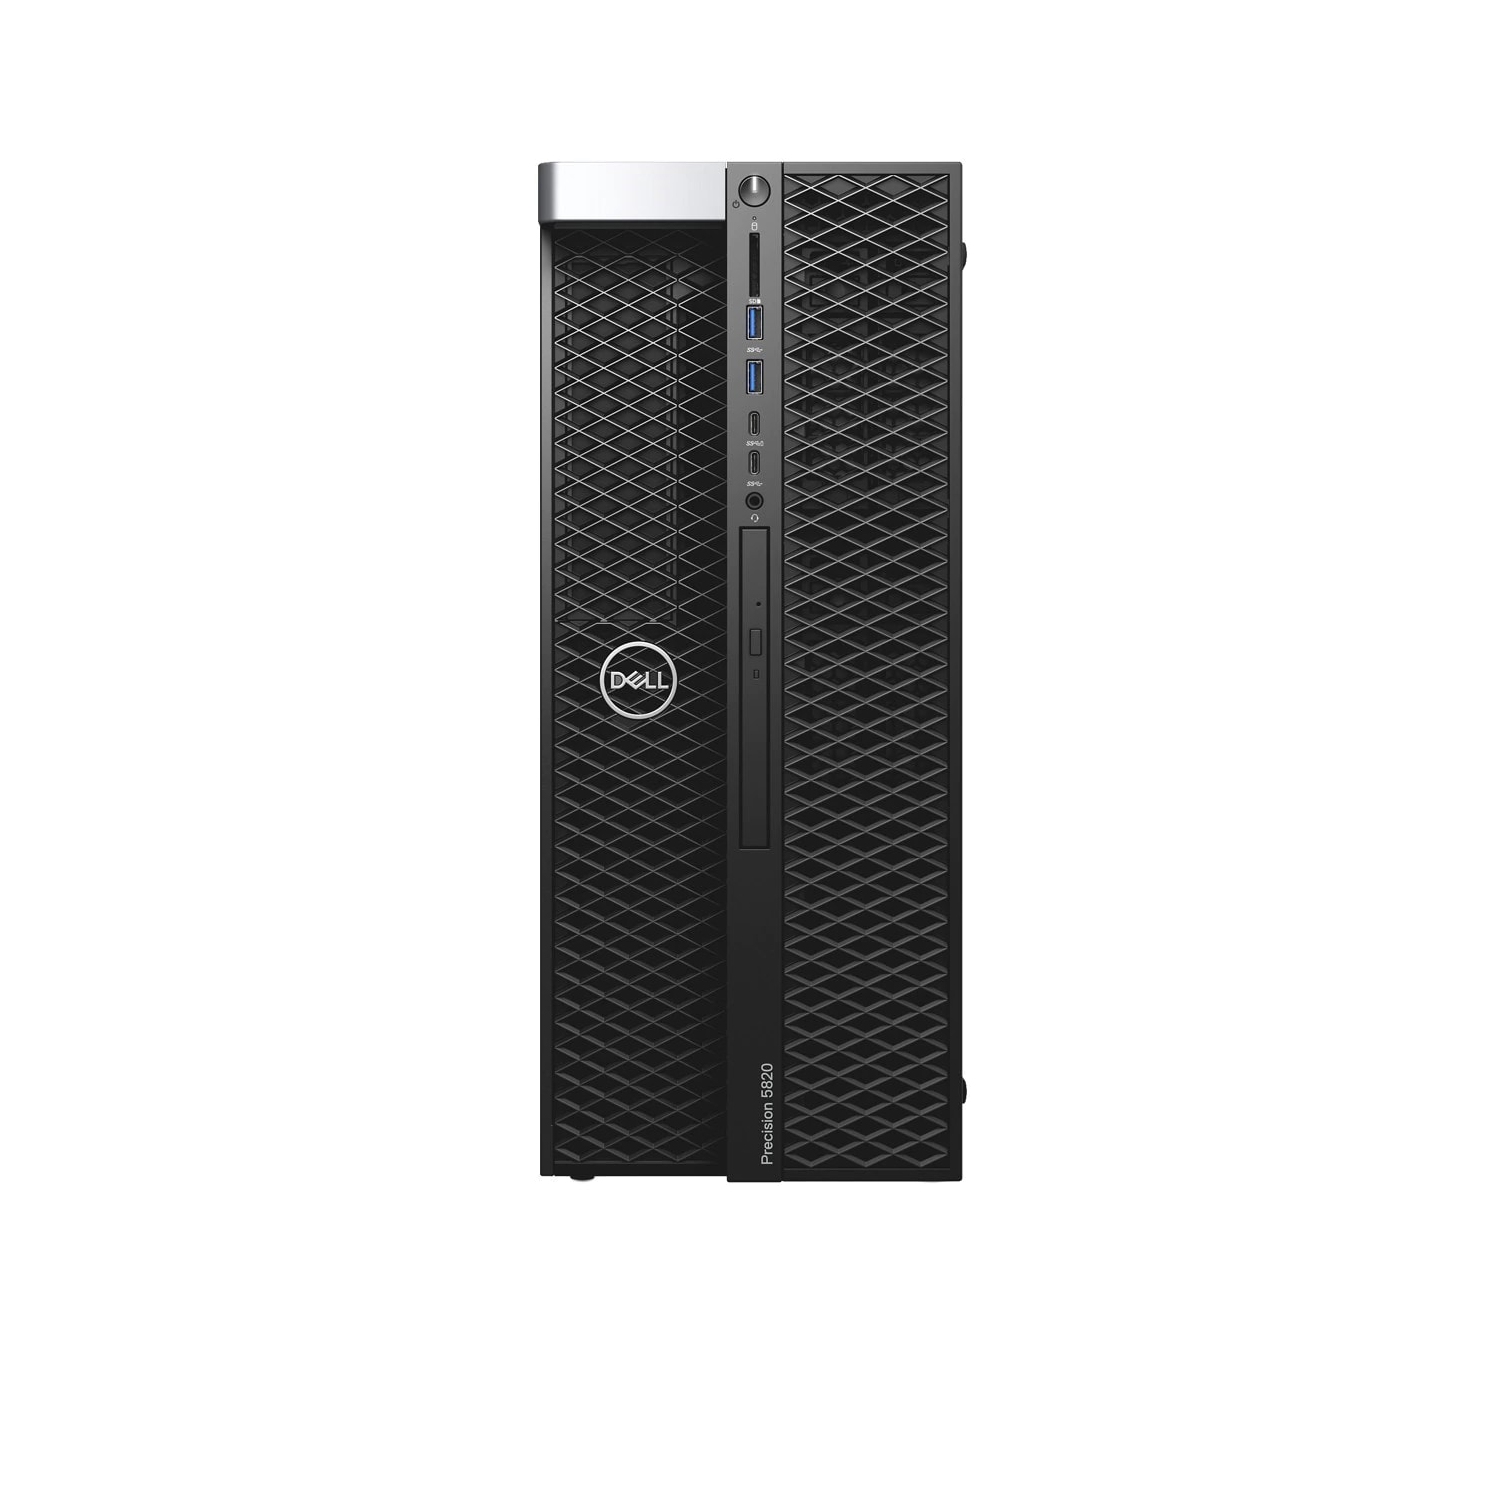 Refurbished (Excellent) - Dell Precision T5820 Workstation Desktop (2018) | Core Xeon W - 512GB SSD - 32GB RAM - RTX 5000 | 4 Cores @ 3.9 GHz Certified Refurbished